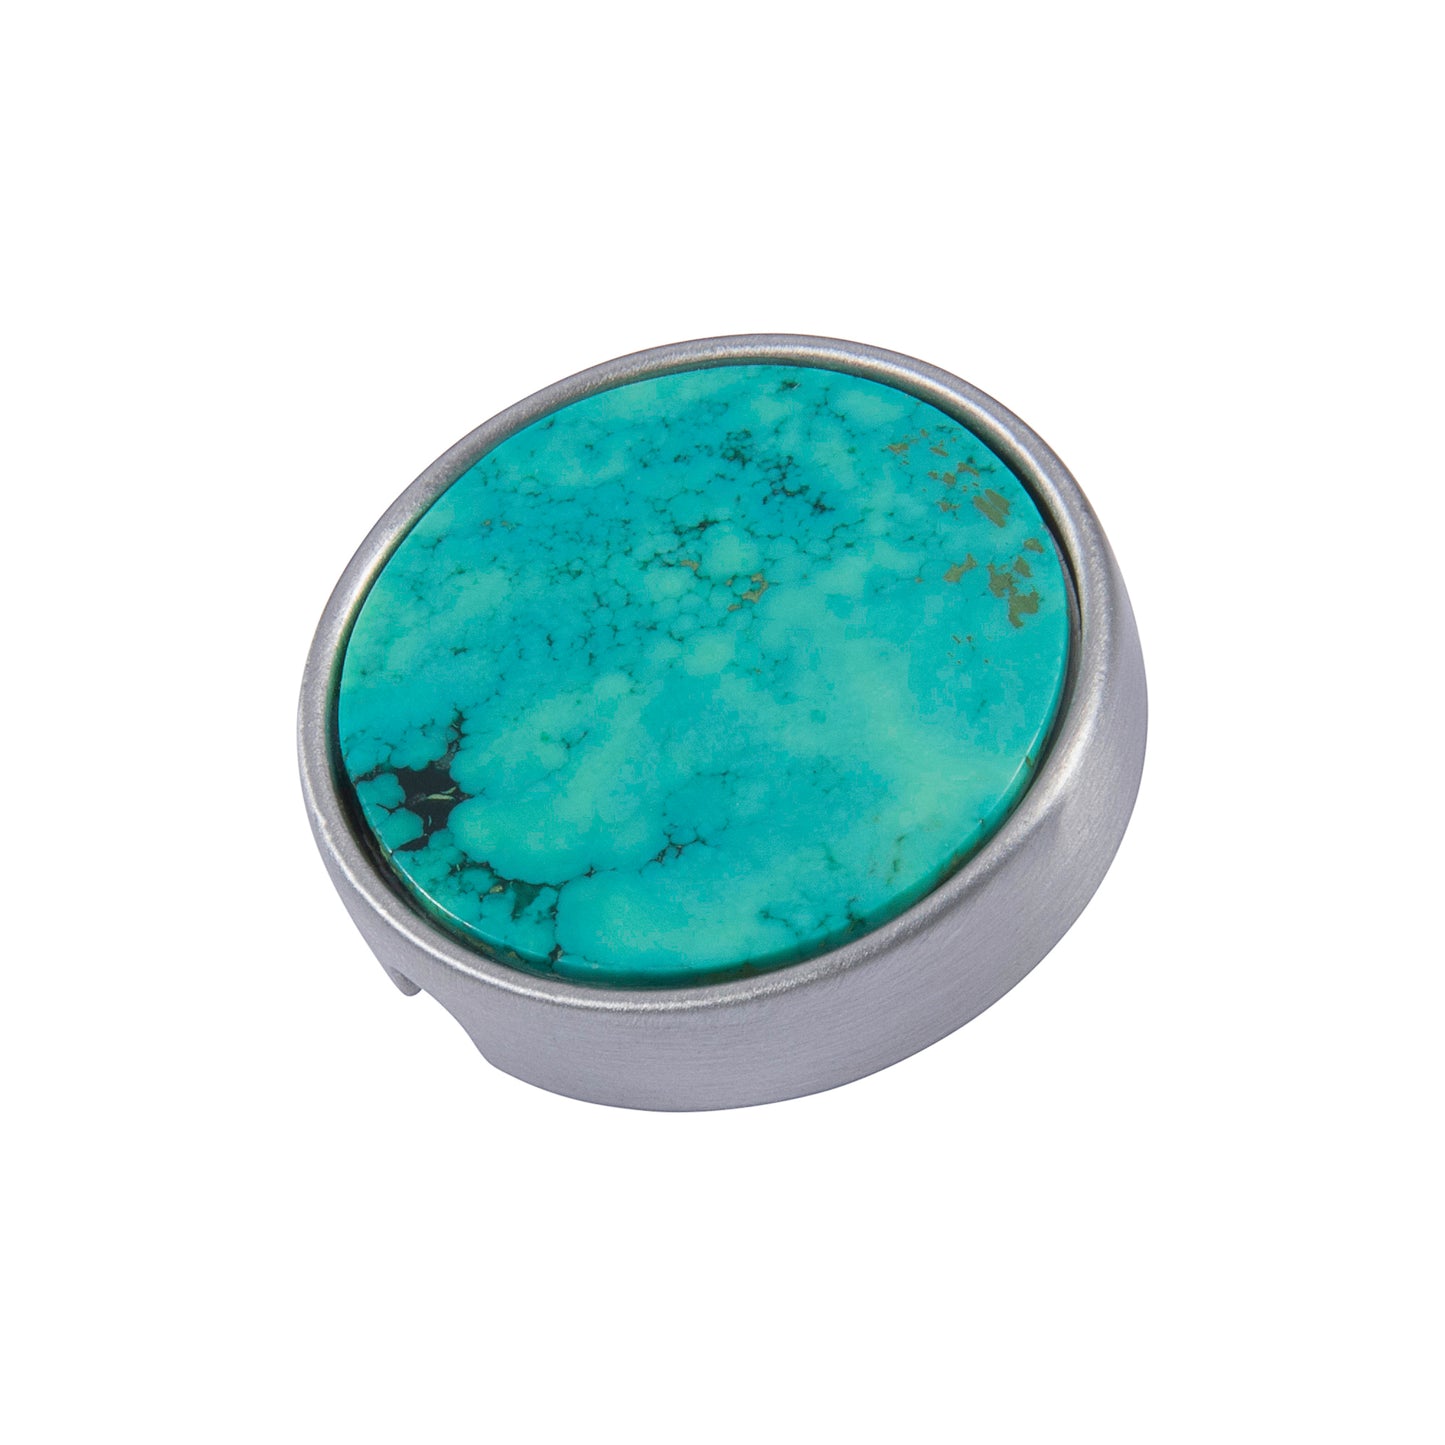 21mm button in brushed gold metal and Tibetan turquoise